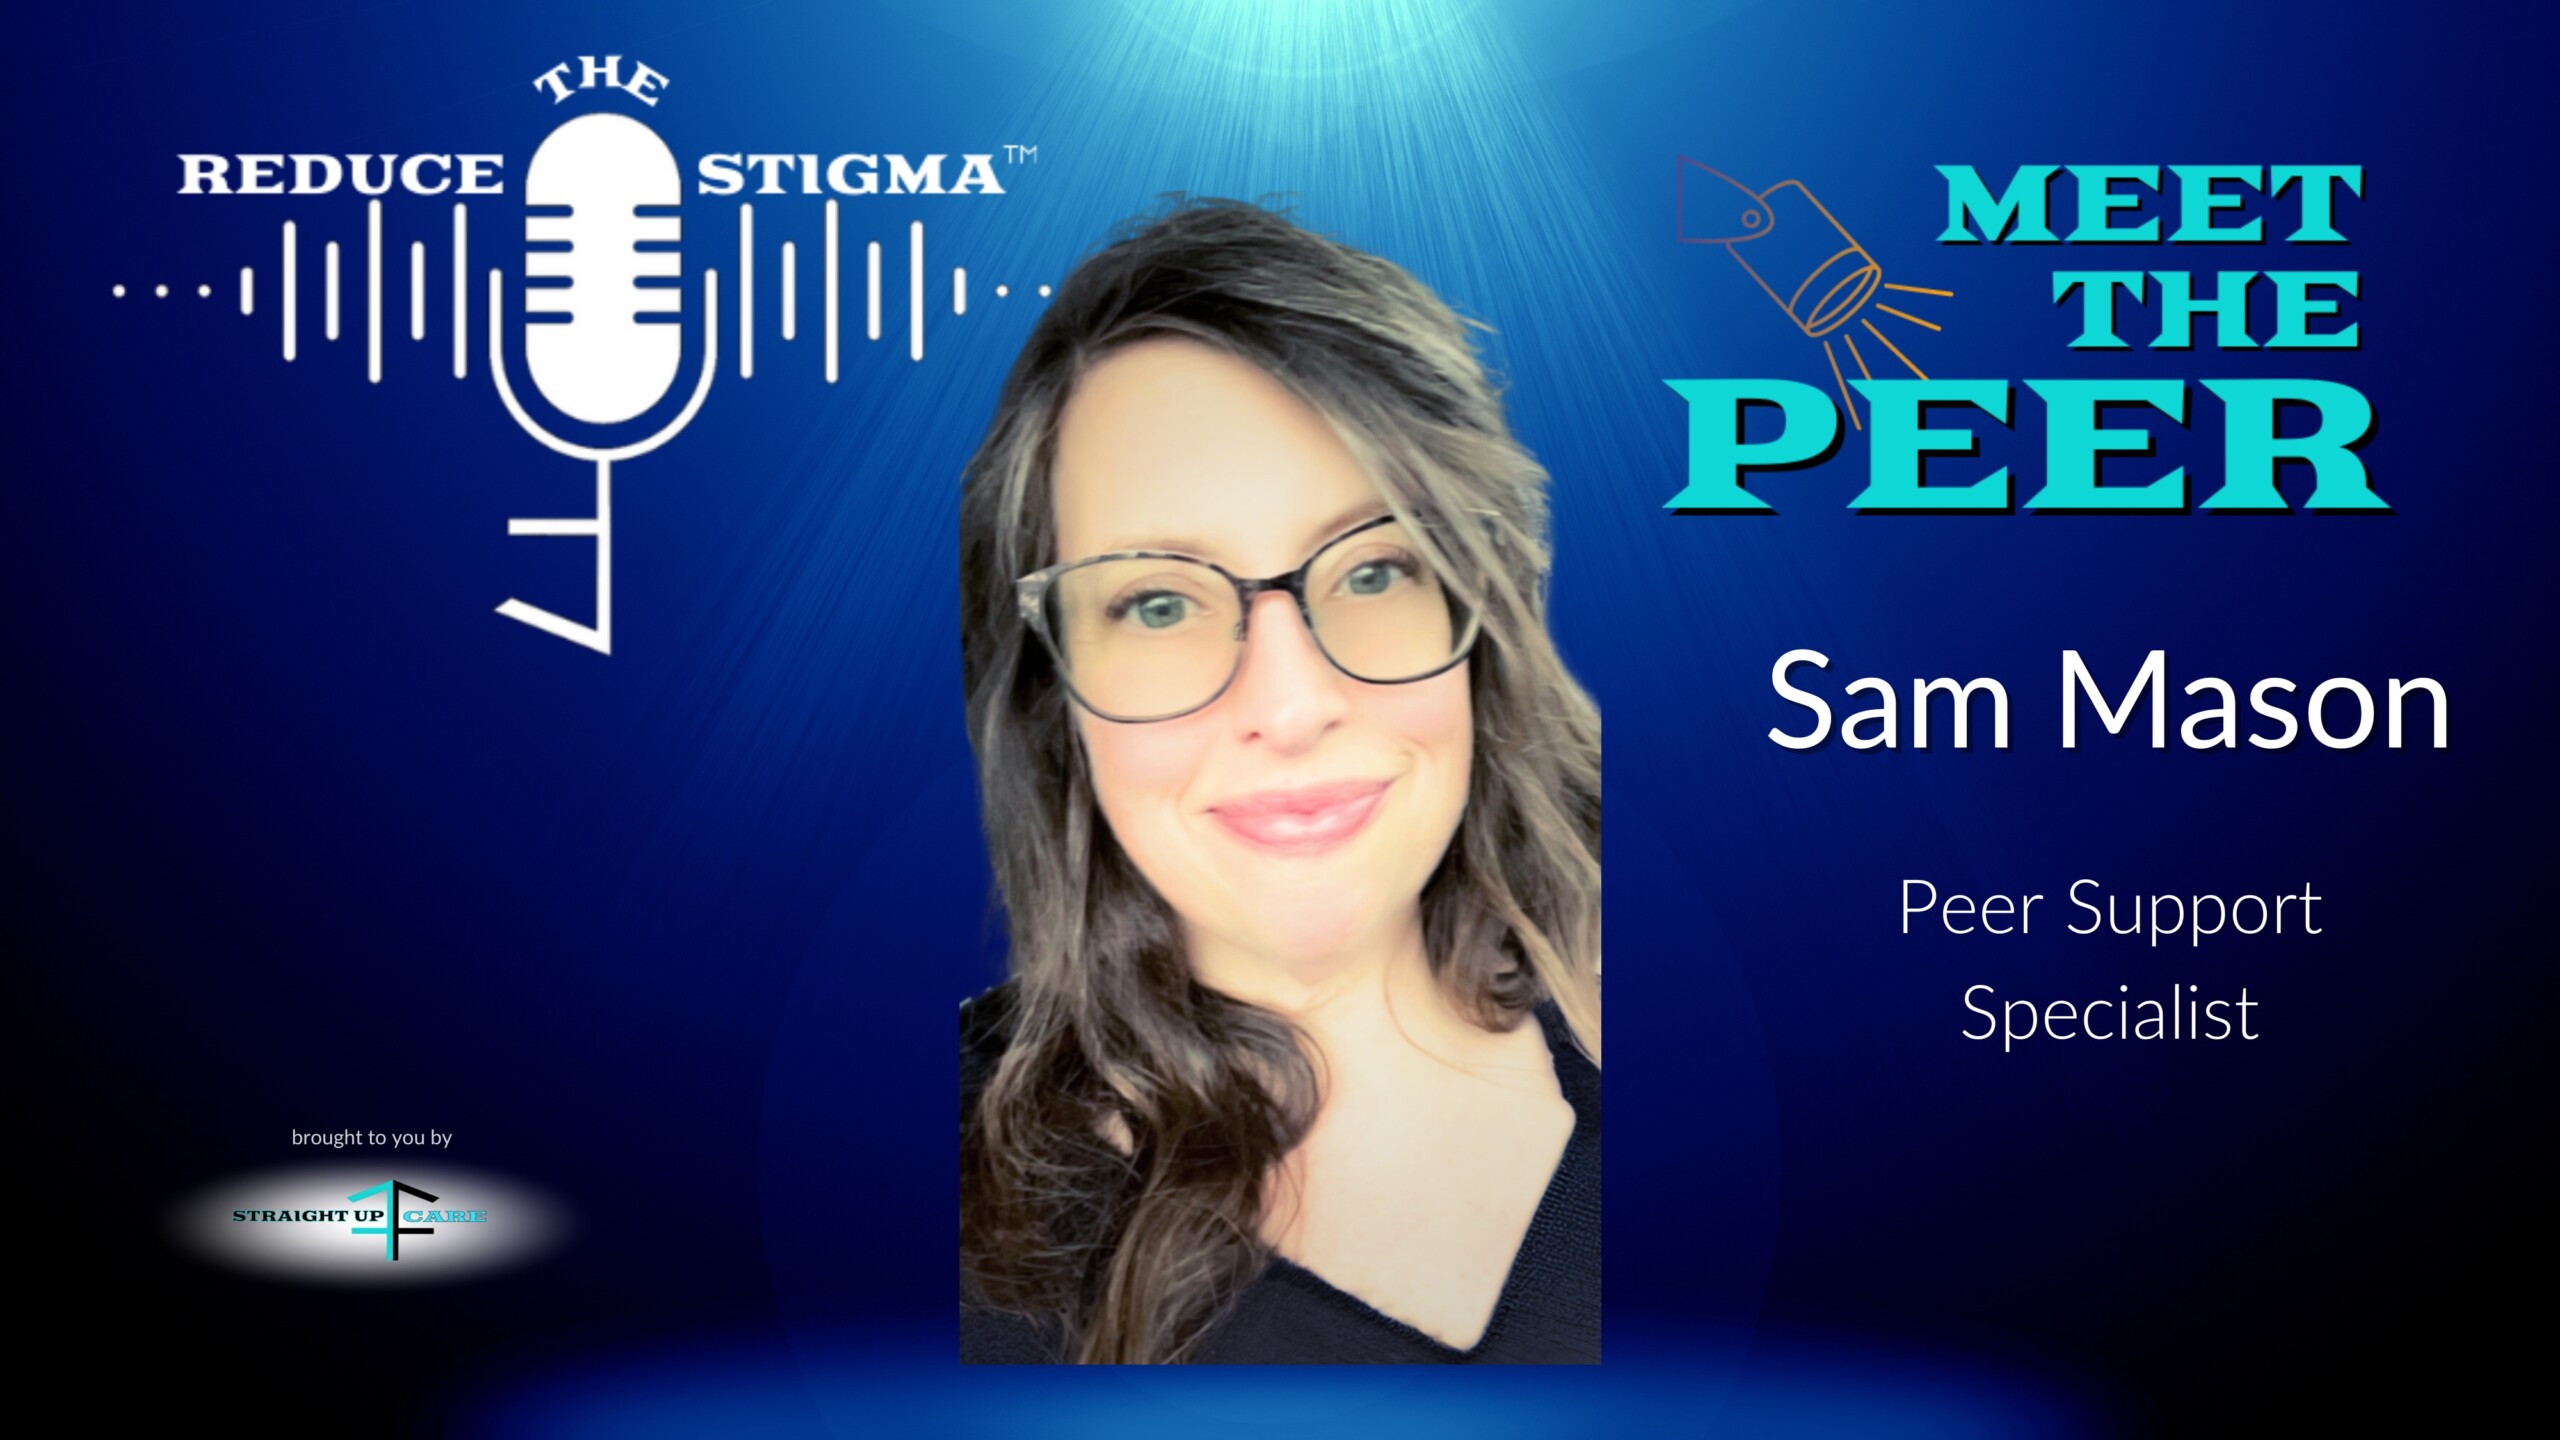 Sam Mason on Meet The Peer - support for all: empathy, healing and lived experience